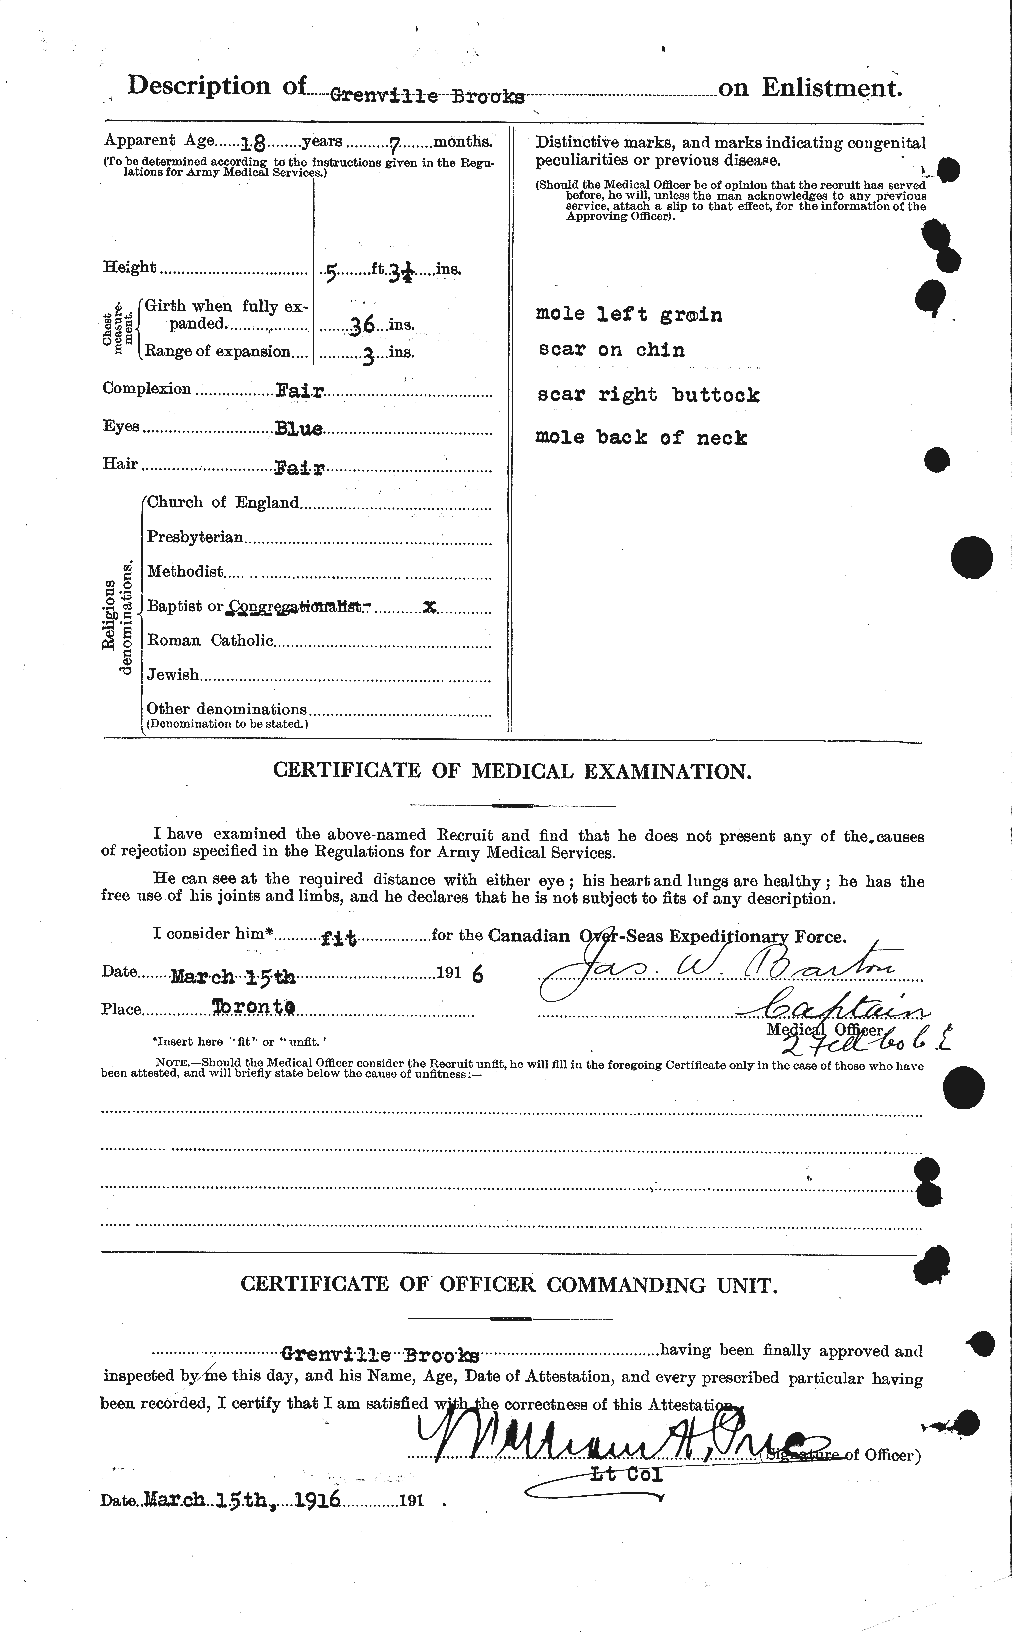 Personnel Records of the First World War - CEF 261673b